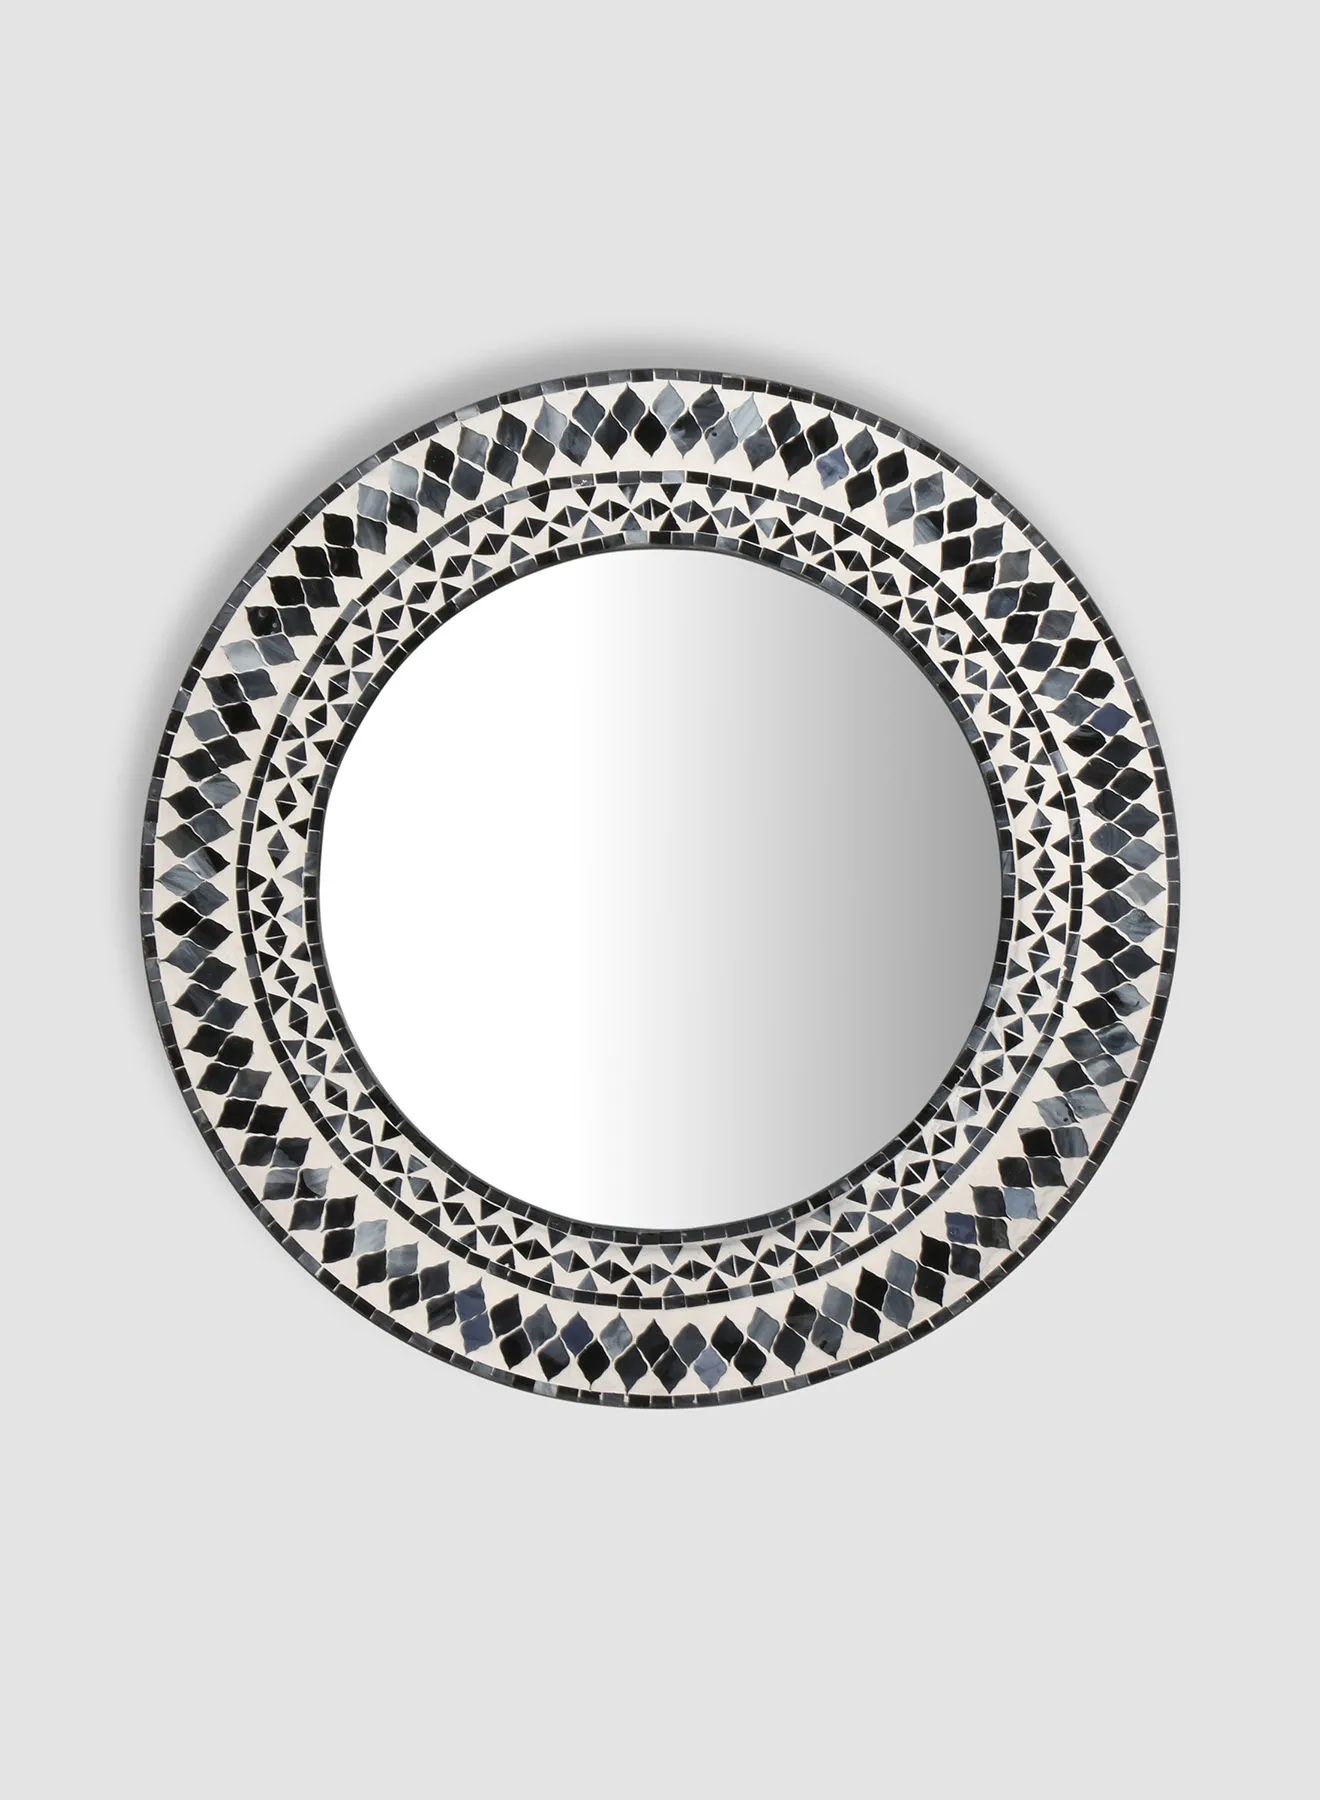 Switch Modern Design Wall Mirror Unique Luxury Quality Material For The Perfect Stylish Home CCM12702 Black/Grey Dia61centimeter